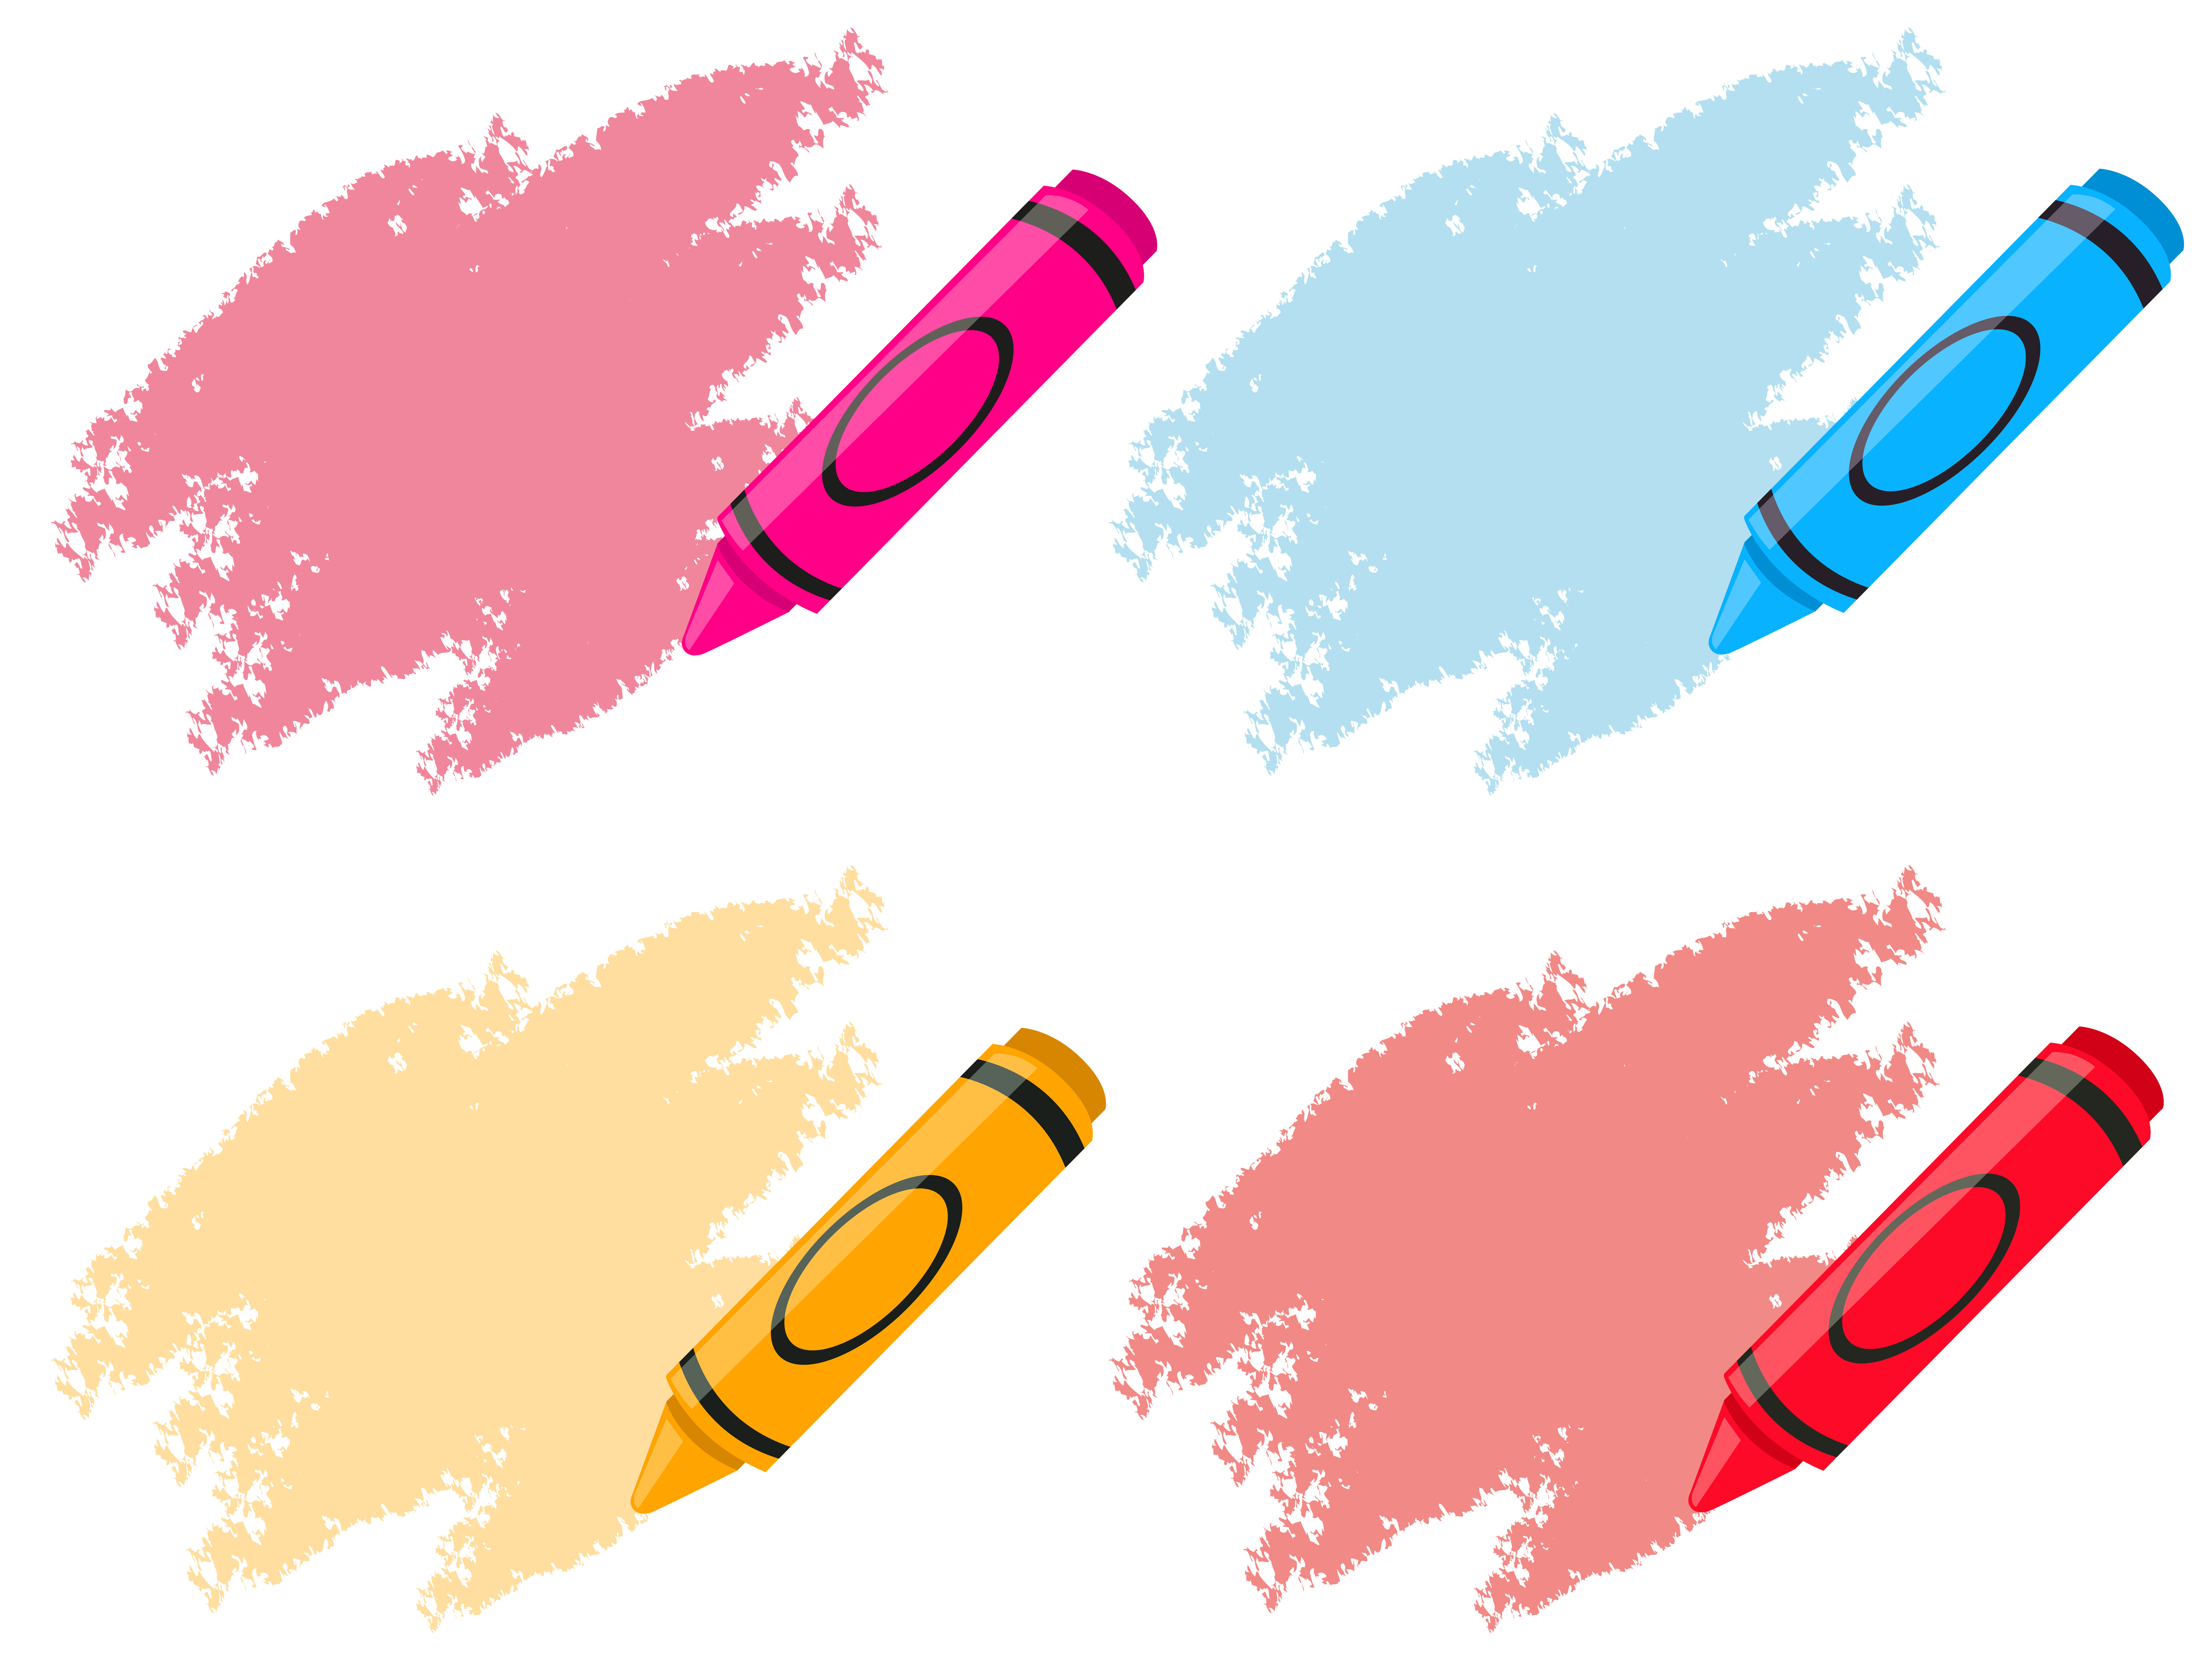 Crayon Background Free Vector Art 4846 Free Downloads